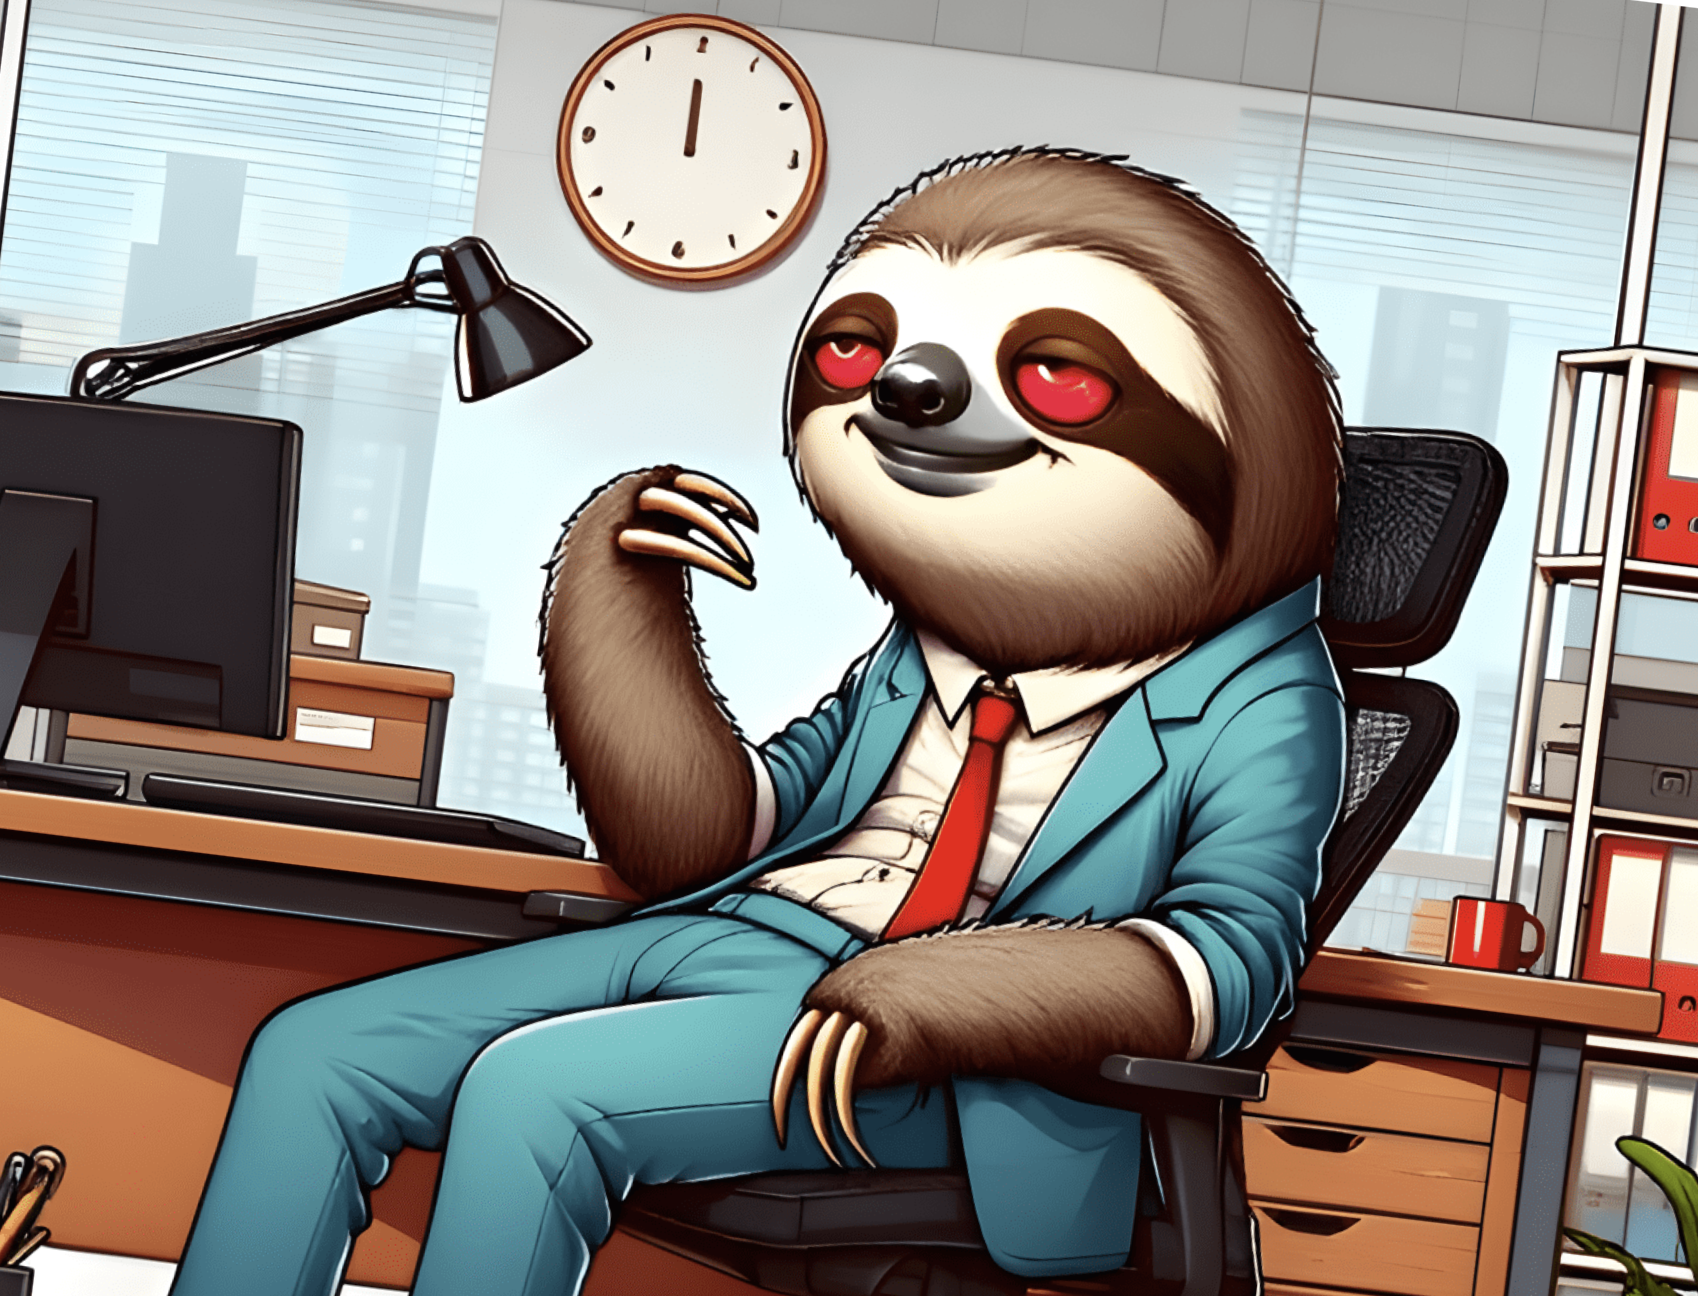 Is It Too Late To Buy SLOTH? Slothana Price Pumps 59% As This New ‘Send SOL’ ICO Races Past $300K In A Week